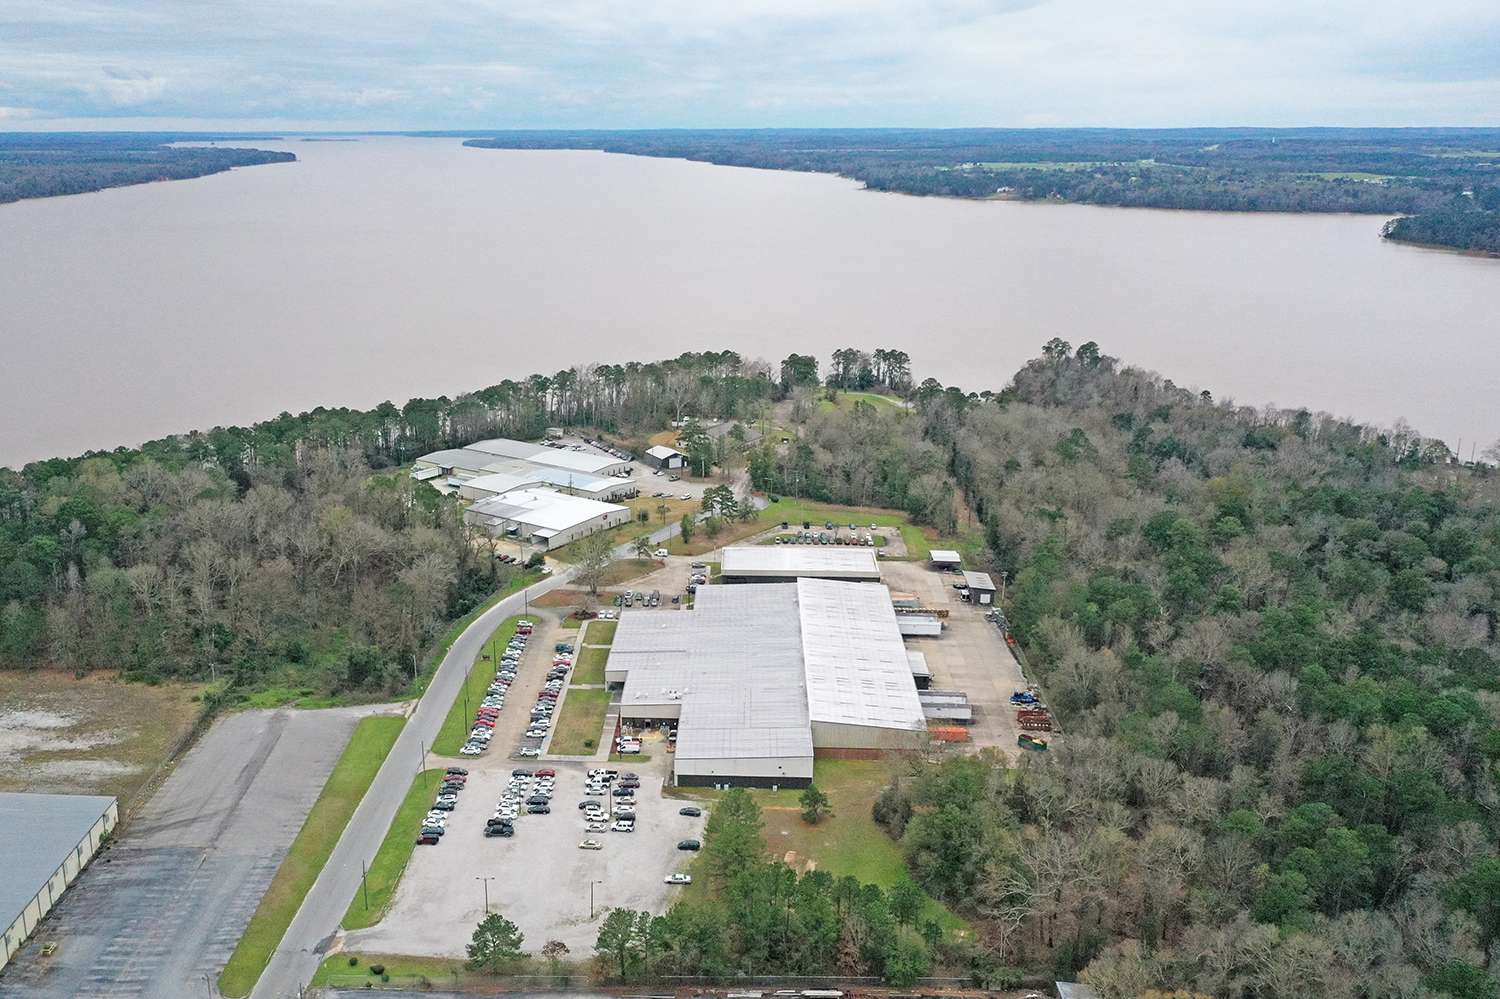 And finally, this is the famed Humminbird point. That is the Humminbird manufacturing facility, based out of Eufaula, Ala. 